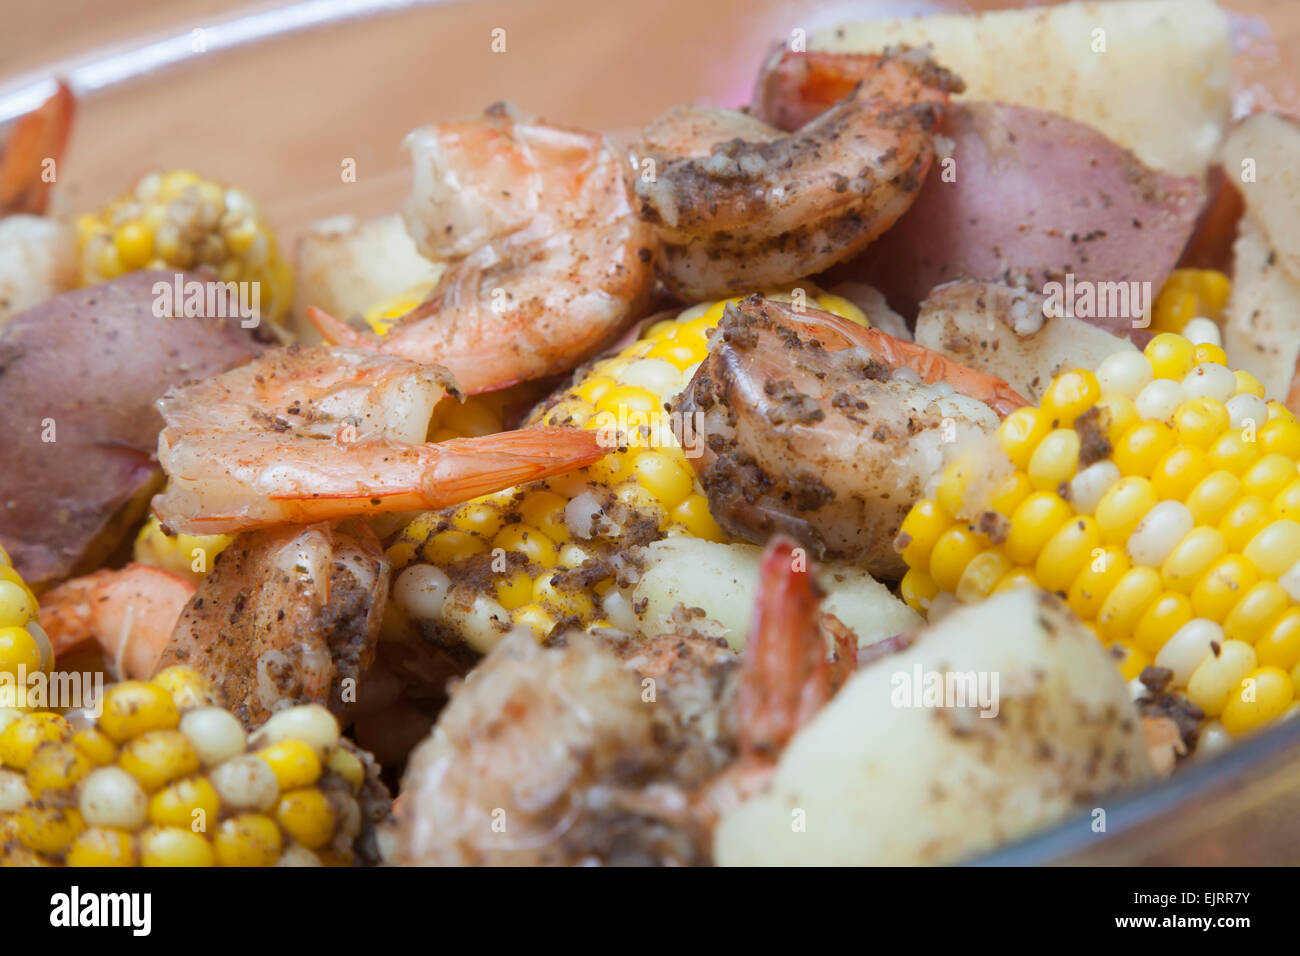 A glass bowl is filled with corn on the cob, red potatoes, and shrimp - a classic shrimp boil Stock Photo